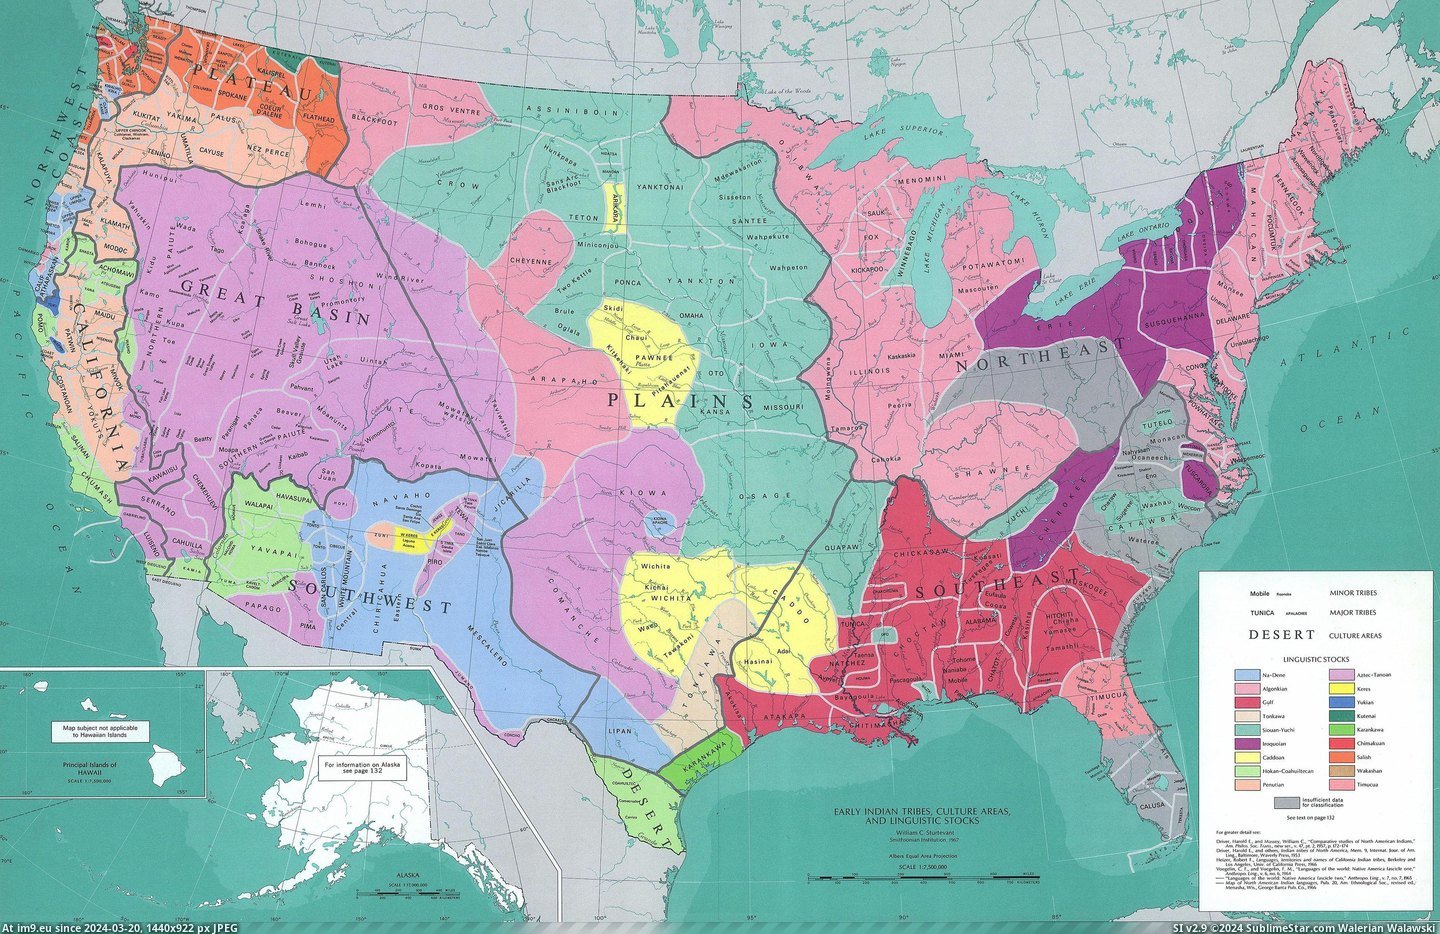 #Early #Americans #Native #Usa [Mapporn] Early Localizations - Native Americans - USA [3850x2476] Pic. (Bild von album My r/MAPS favs))